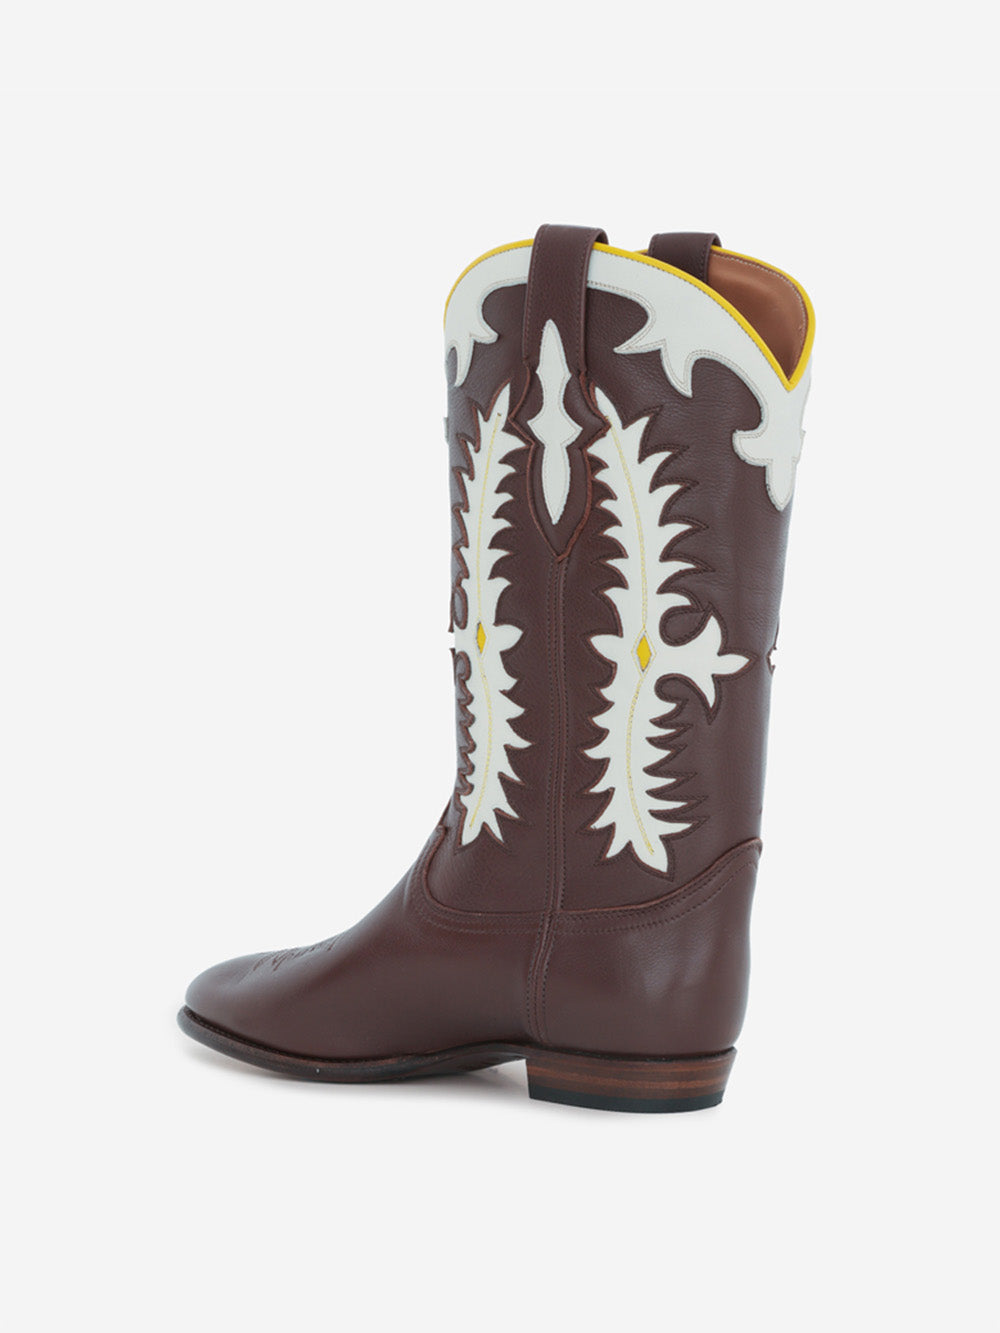 BOTTES MIDNIGHT TEXAS BROWN ARTIC